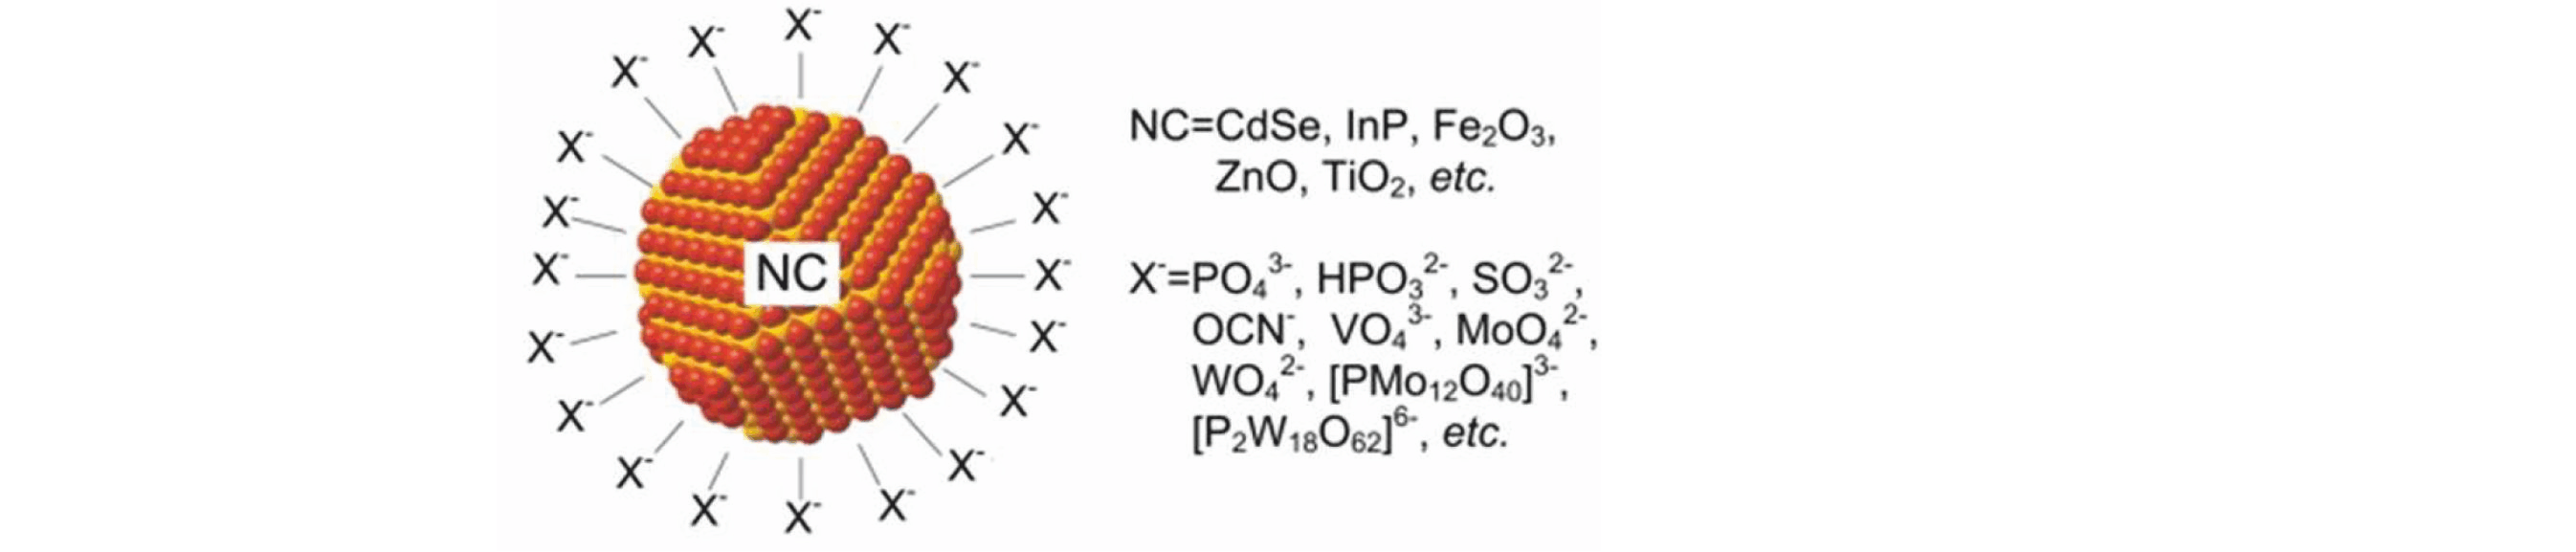 Surface Functionalization of Semiconductor and Oxide Nanocrystals with Small Inorganic Oxoanions (PO43-, MoO42-) and Polyoxometalate Ligands